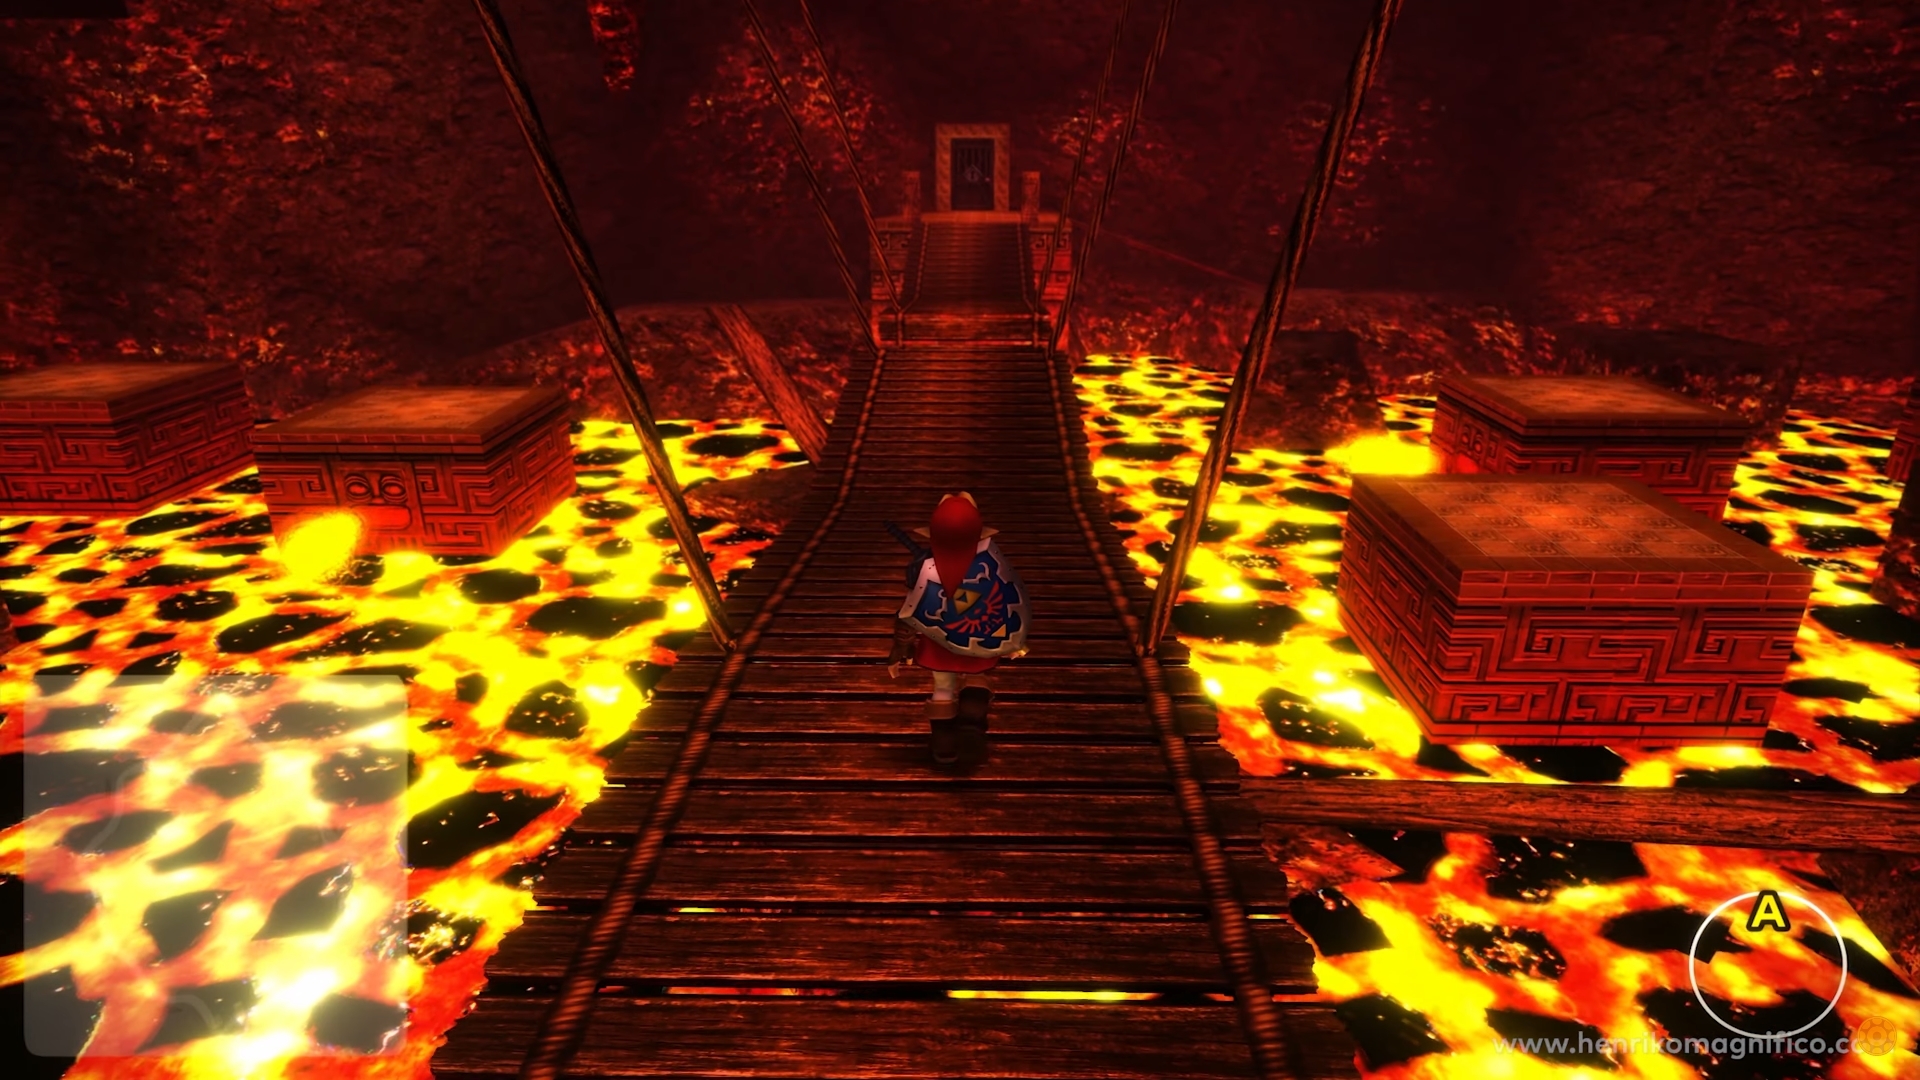 The Legend of Zelda: Ocarina of Time is Being Decompiled for Mods